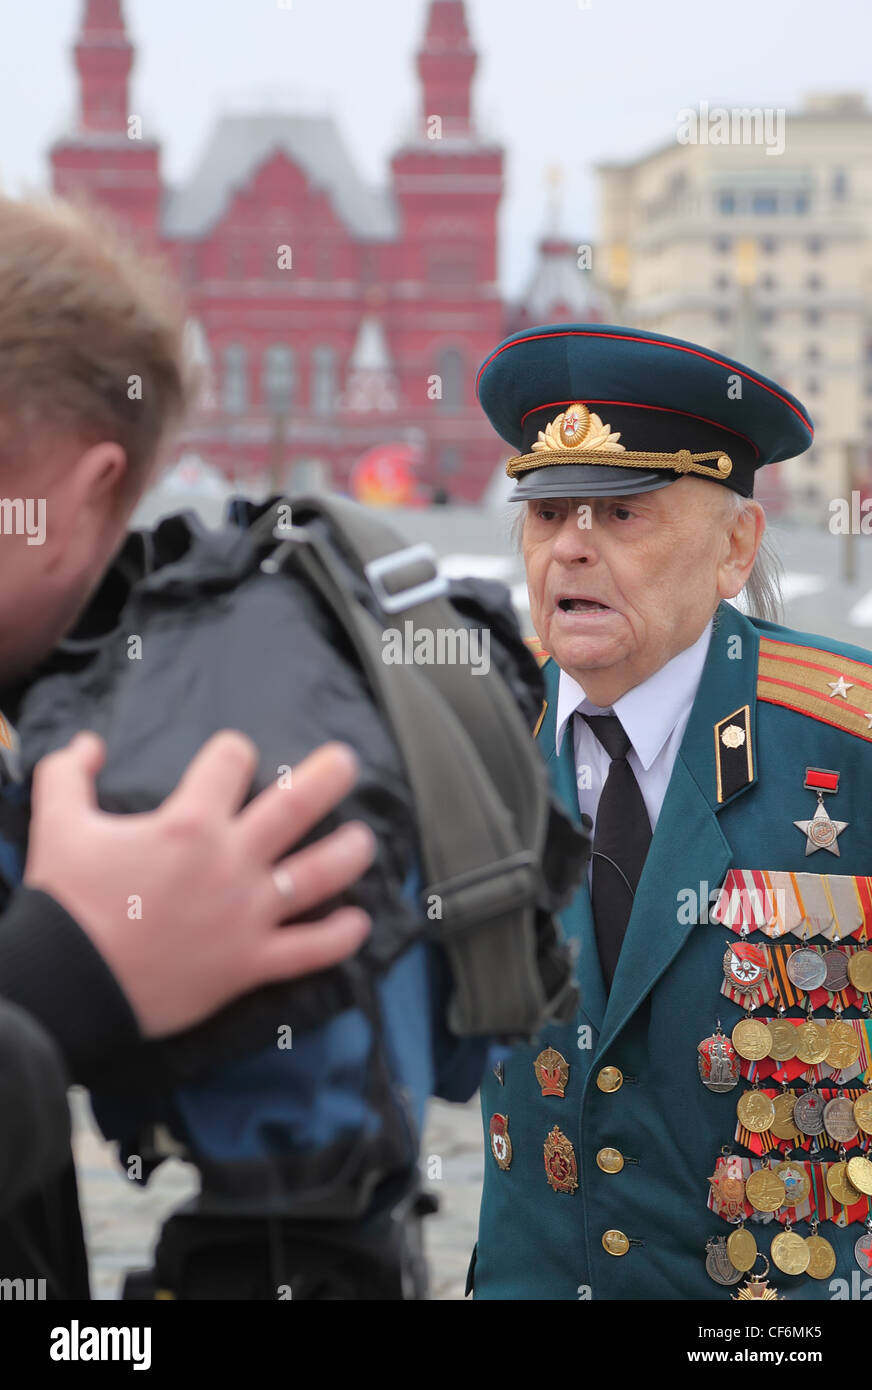 MOSCOW RUSSIA APRIL 24 Great Patriotic War veteran being interviewed by local television company April 24 2010 Moscow Russia. Stock Photo